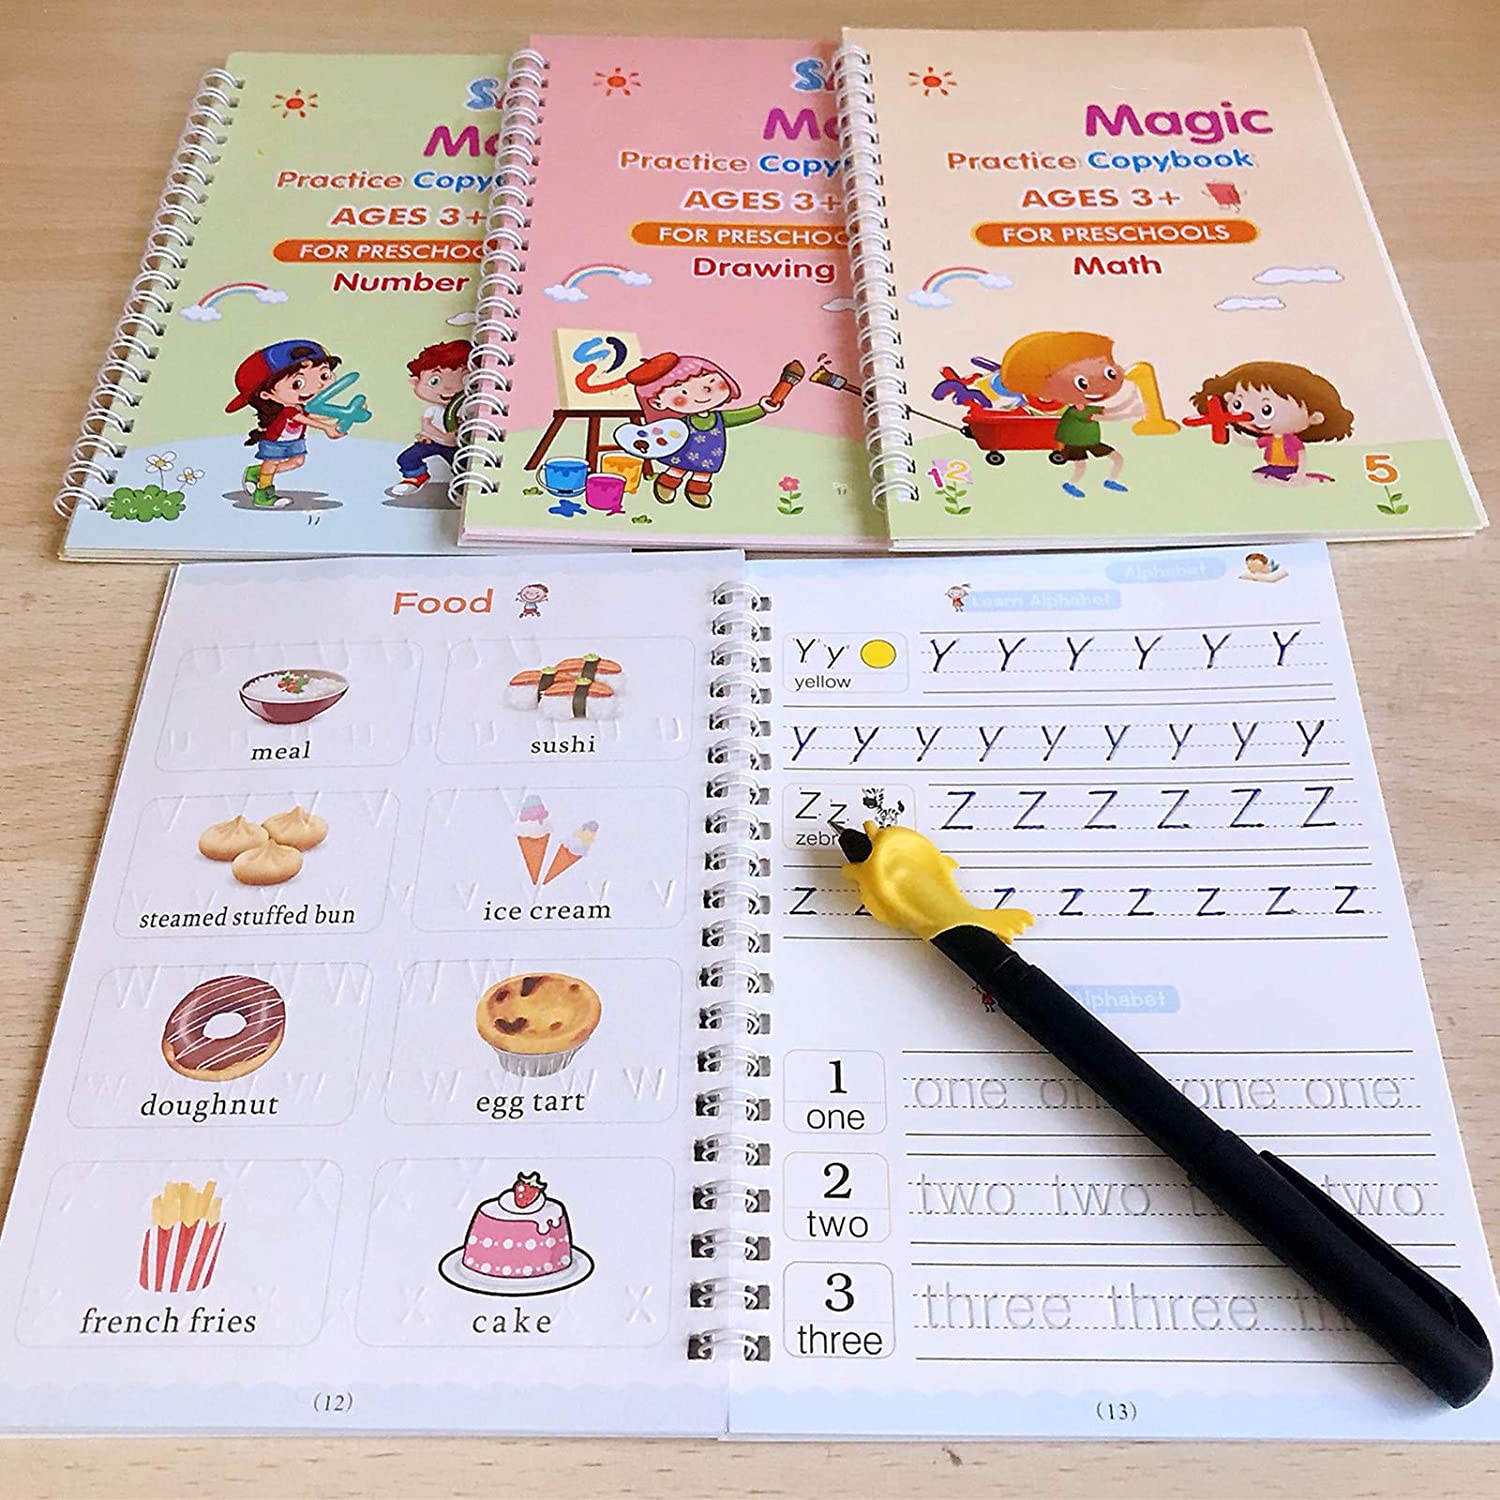 8075 4 Pc Magic Copybook widely used by kids, children’s and even adults also to write down important things over it while emergencies etc - DeoDap